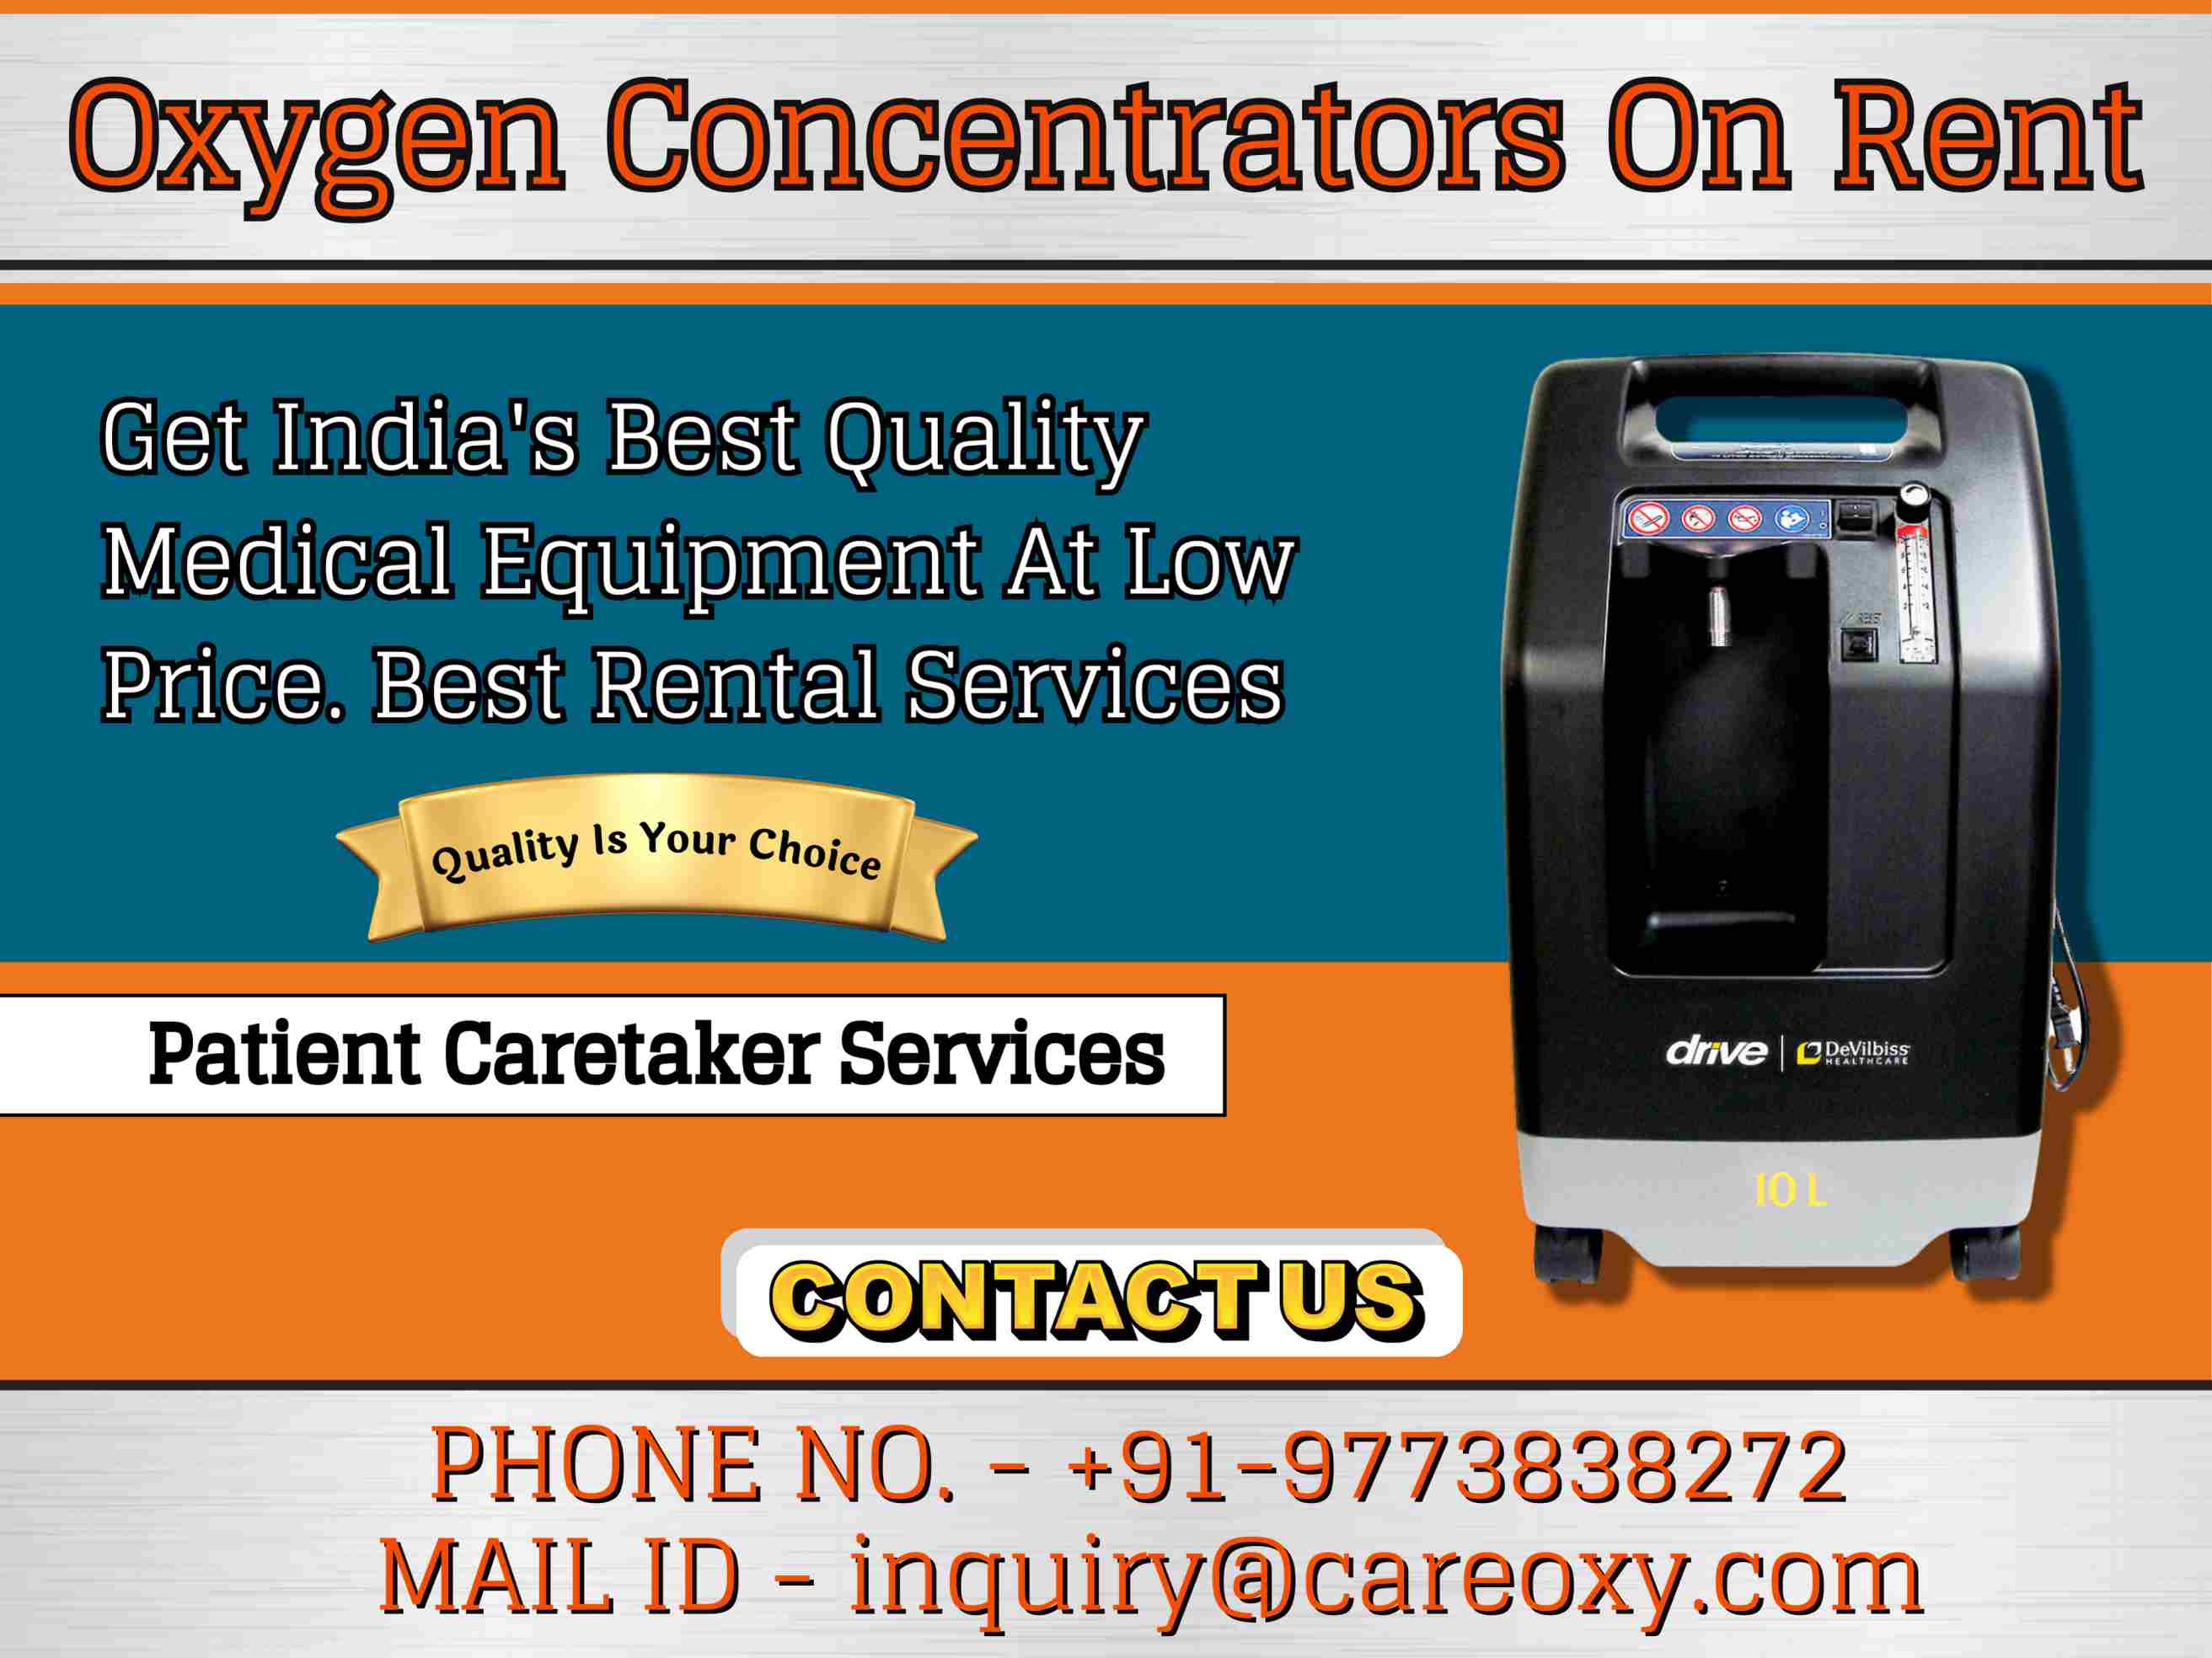 Do You Want Quality Oxygen Concentrators On Rent in Delhi? | Breathe Easy with Care Oxy Company - Delhi Health, Personal Trainer